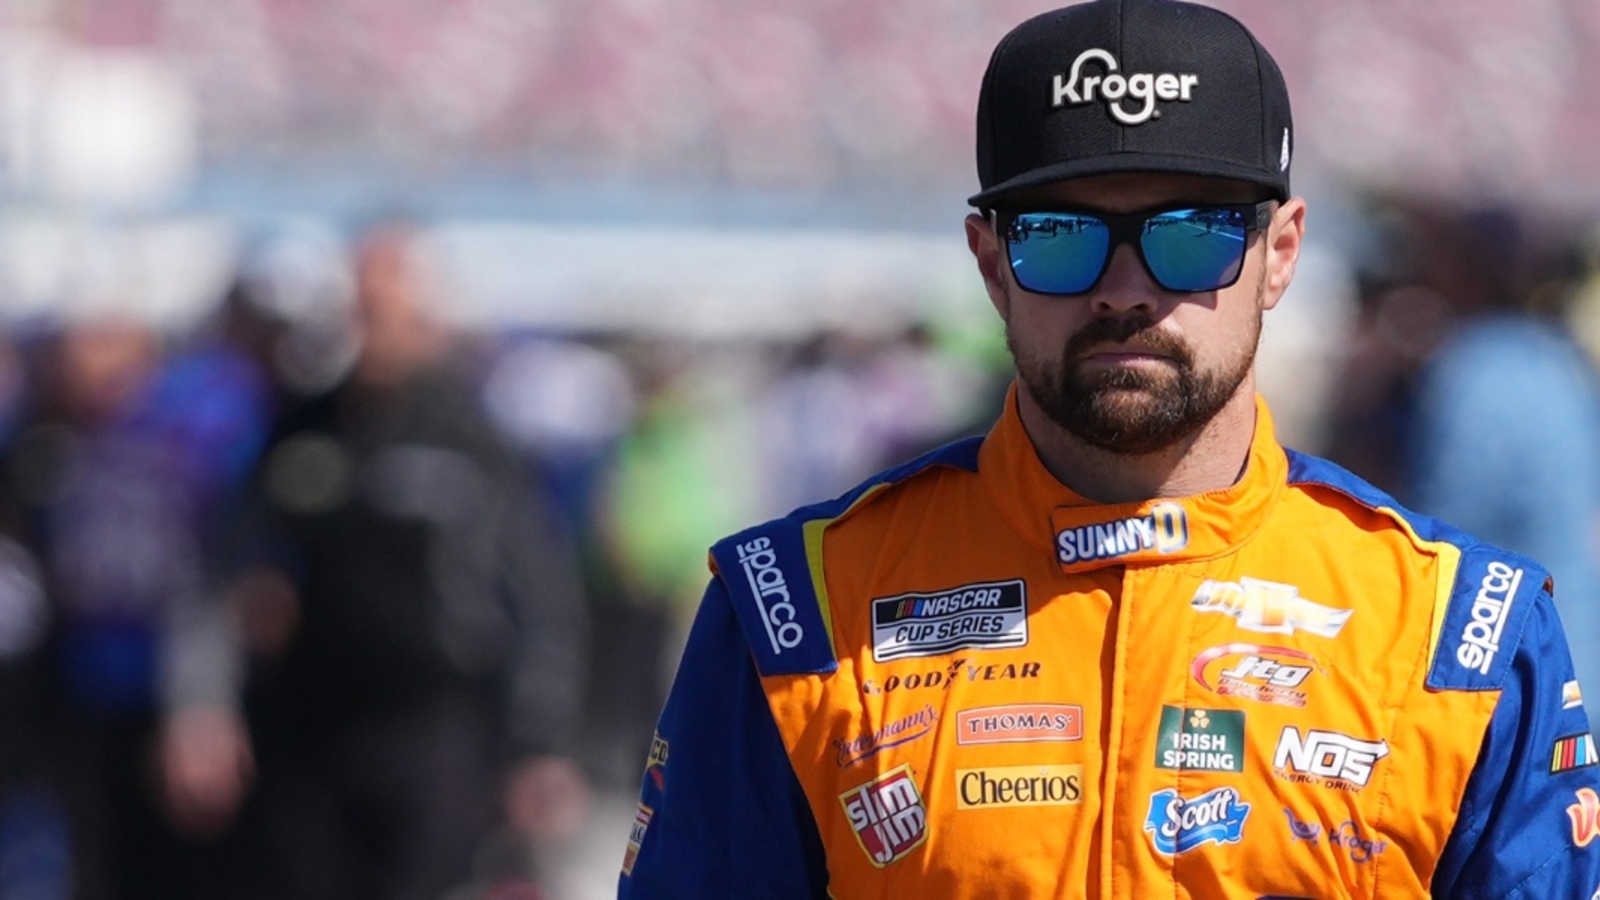 Ricky Stenhouse Jr. threatens to wreck Kyle Busch at Charlotte in Coca-Cola 600